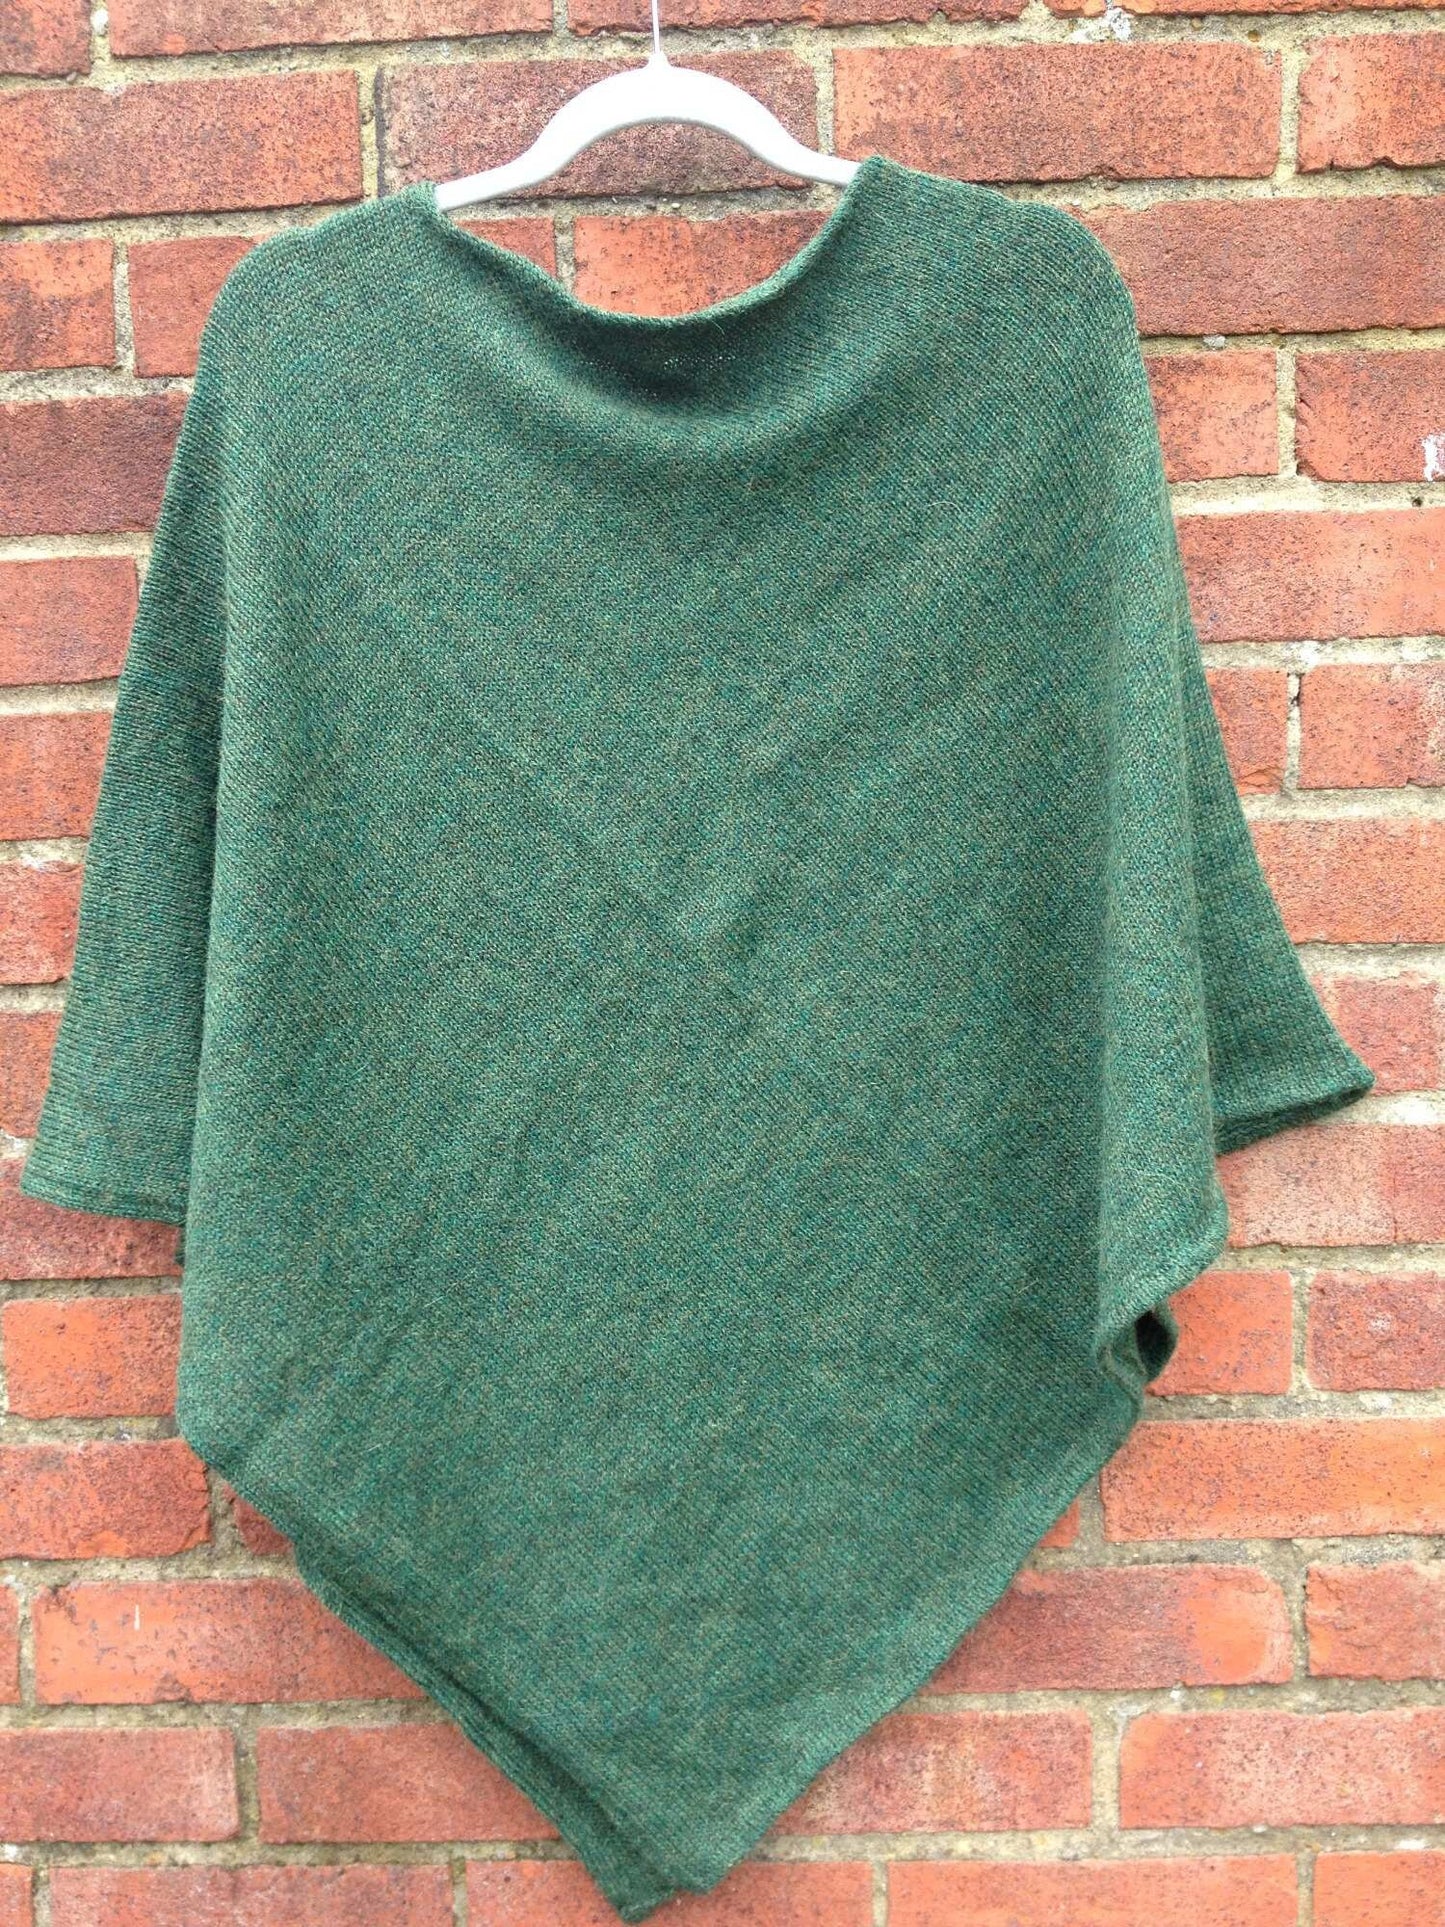 100% Alpaca Poncho, knitted wool, loose fit warm wrap, woollen shawl, winter knit, travel cloak, plastic free, eco gift, ethical, for women